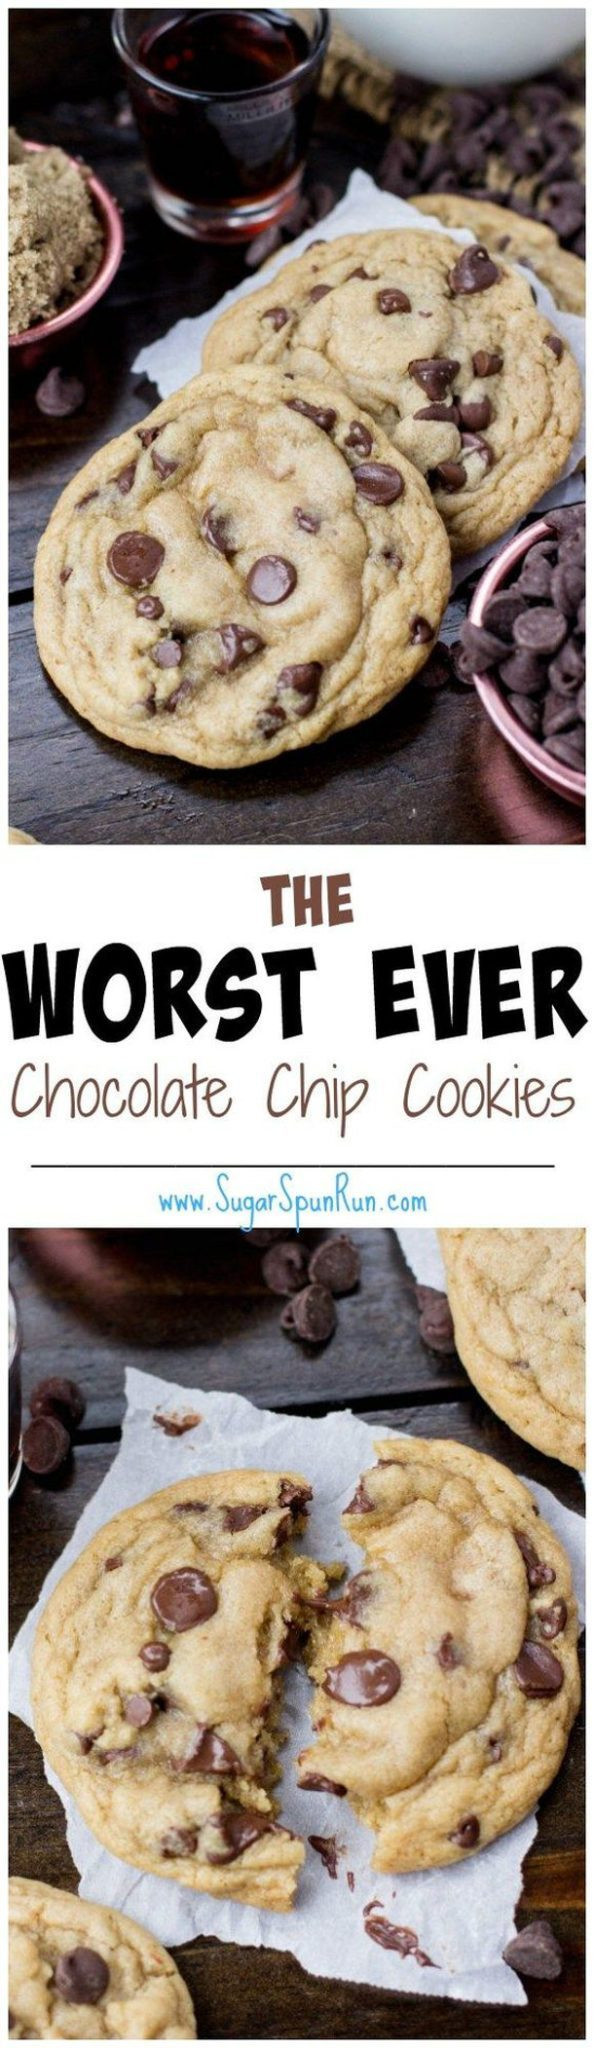 The Worst Chocolate Chip Cookies
 The BEST Chocolate Chip Cookies And Desserts Recipes